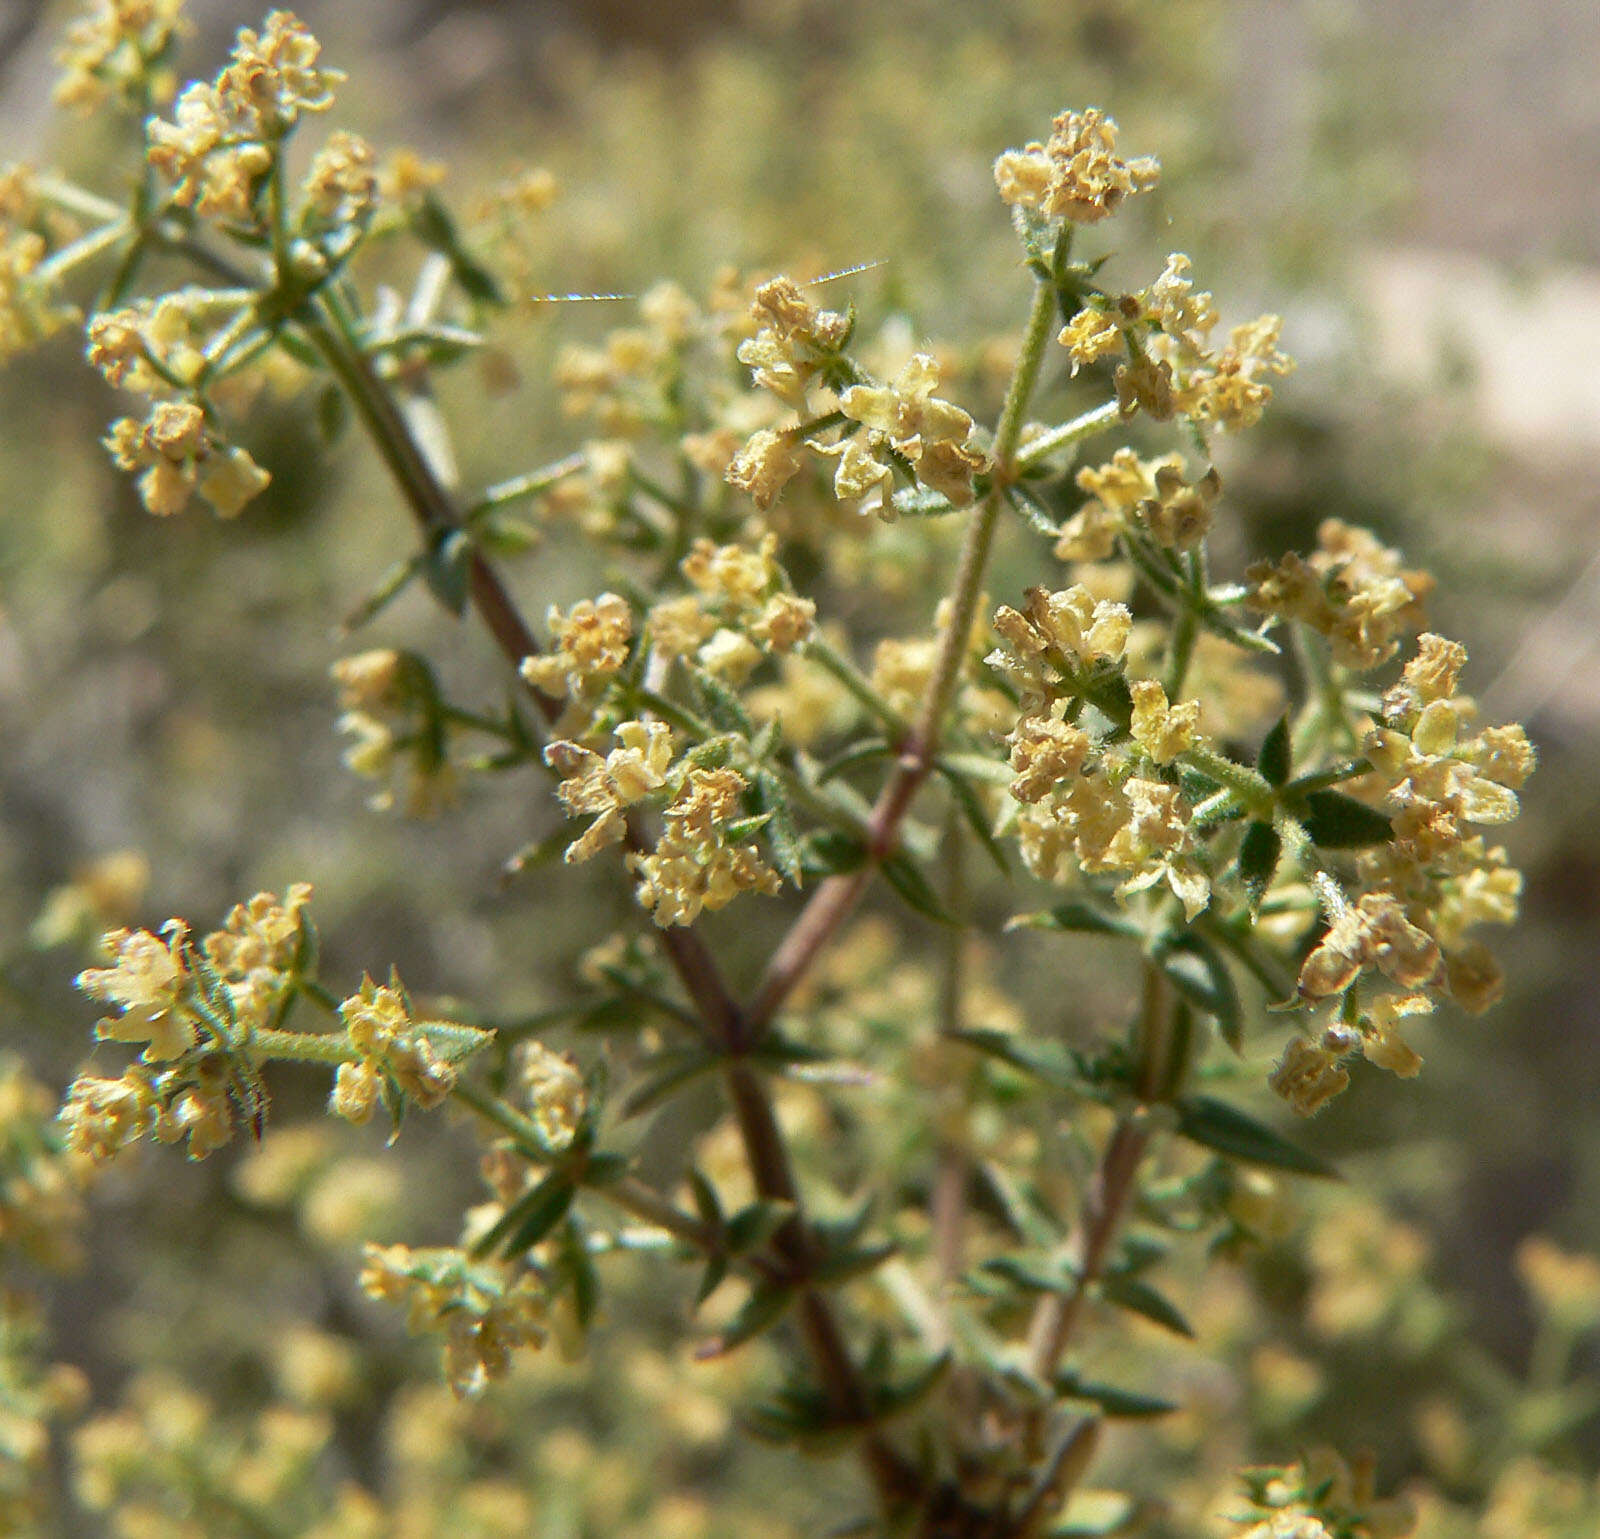 Image of starry bedstraw